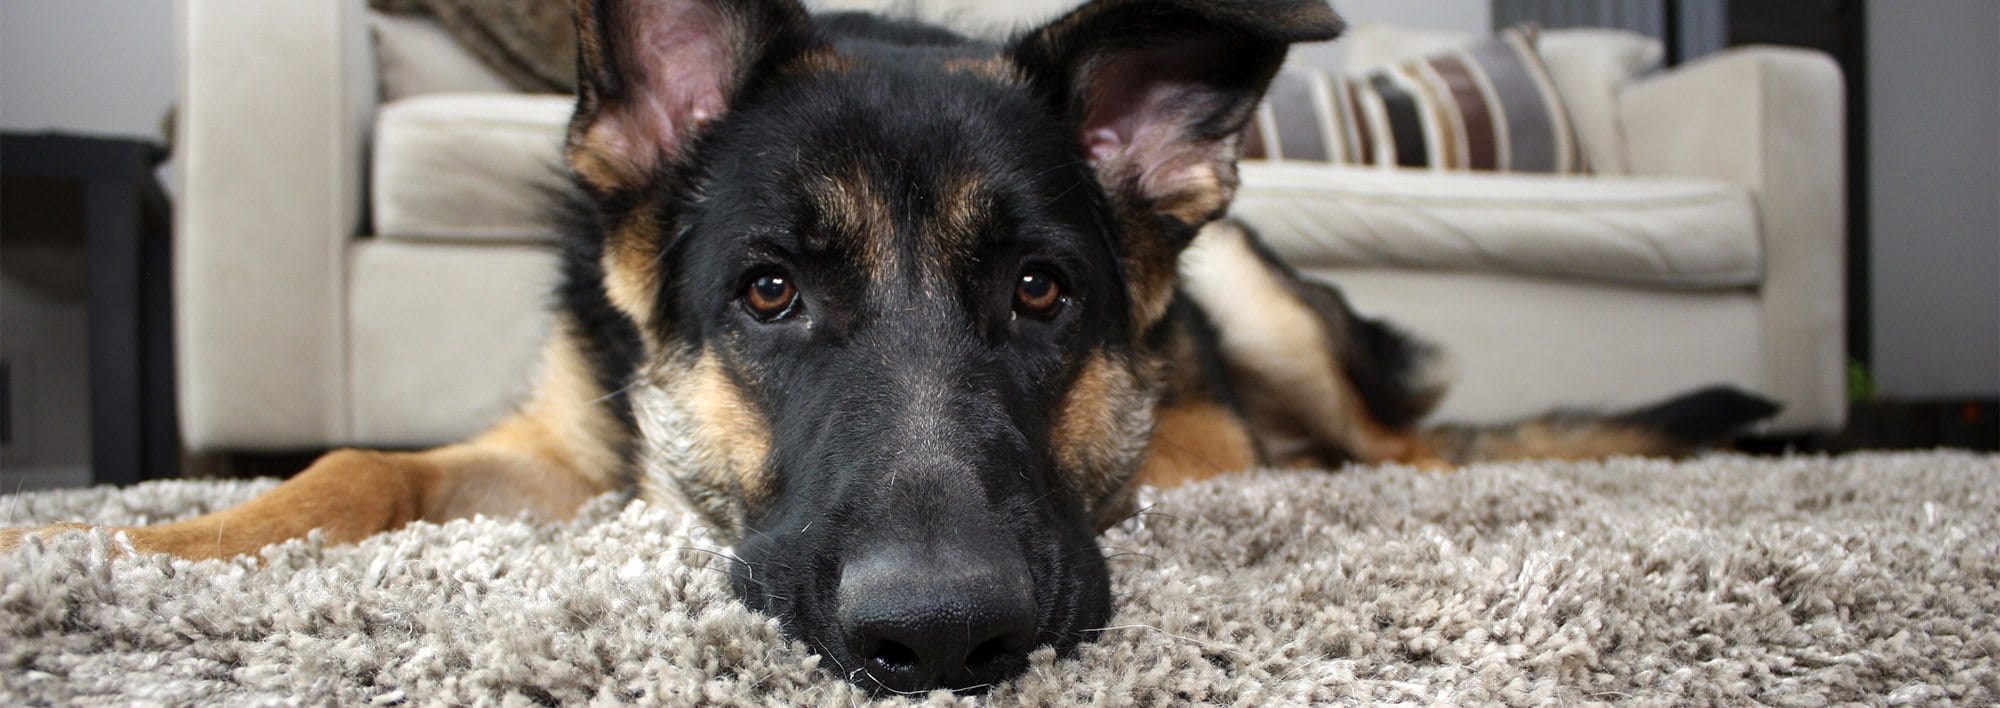 A German shepherd lies on a beige rug with a cream colored couch in the background